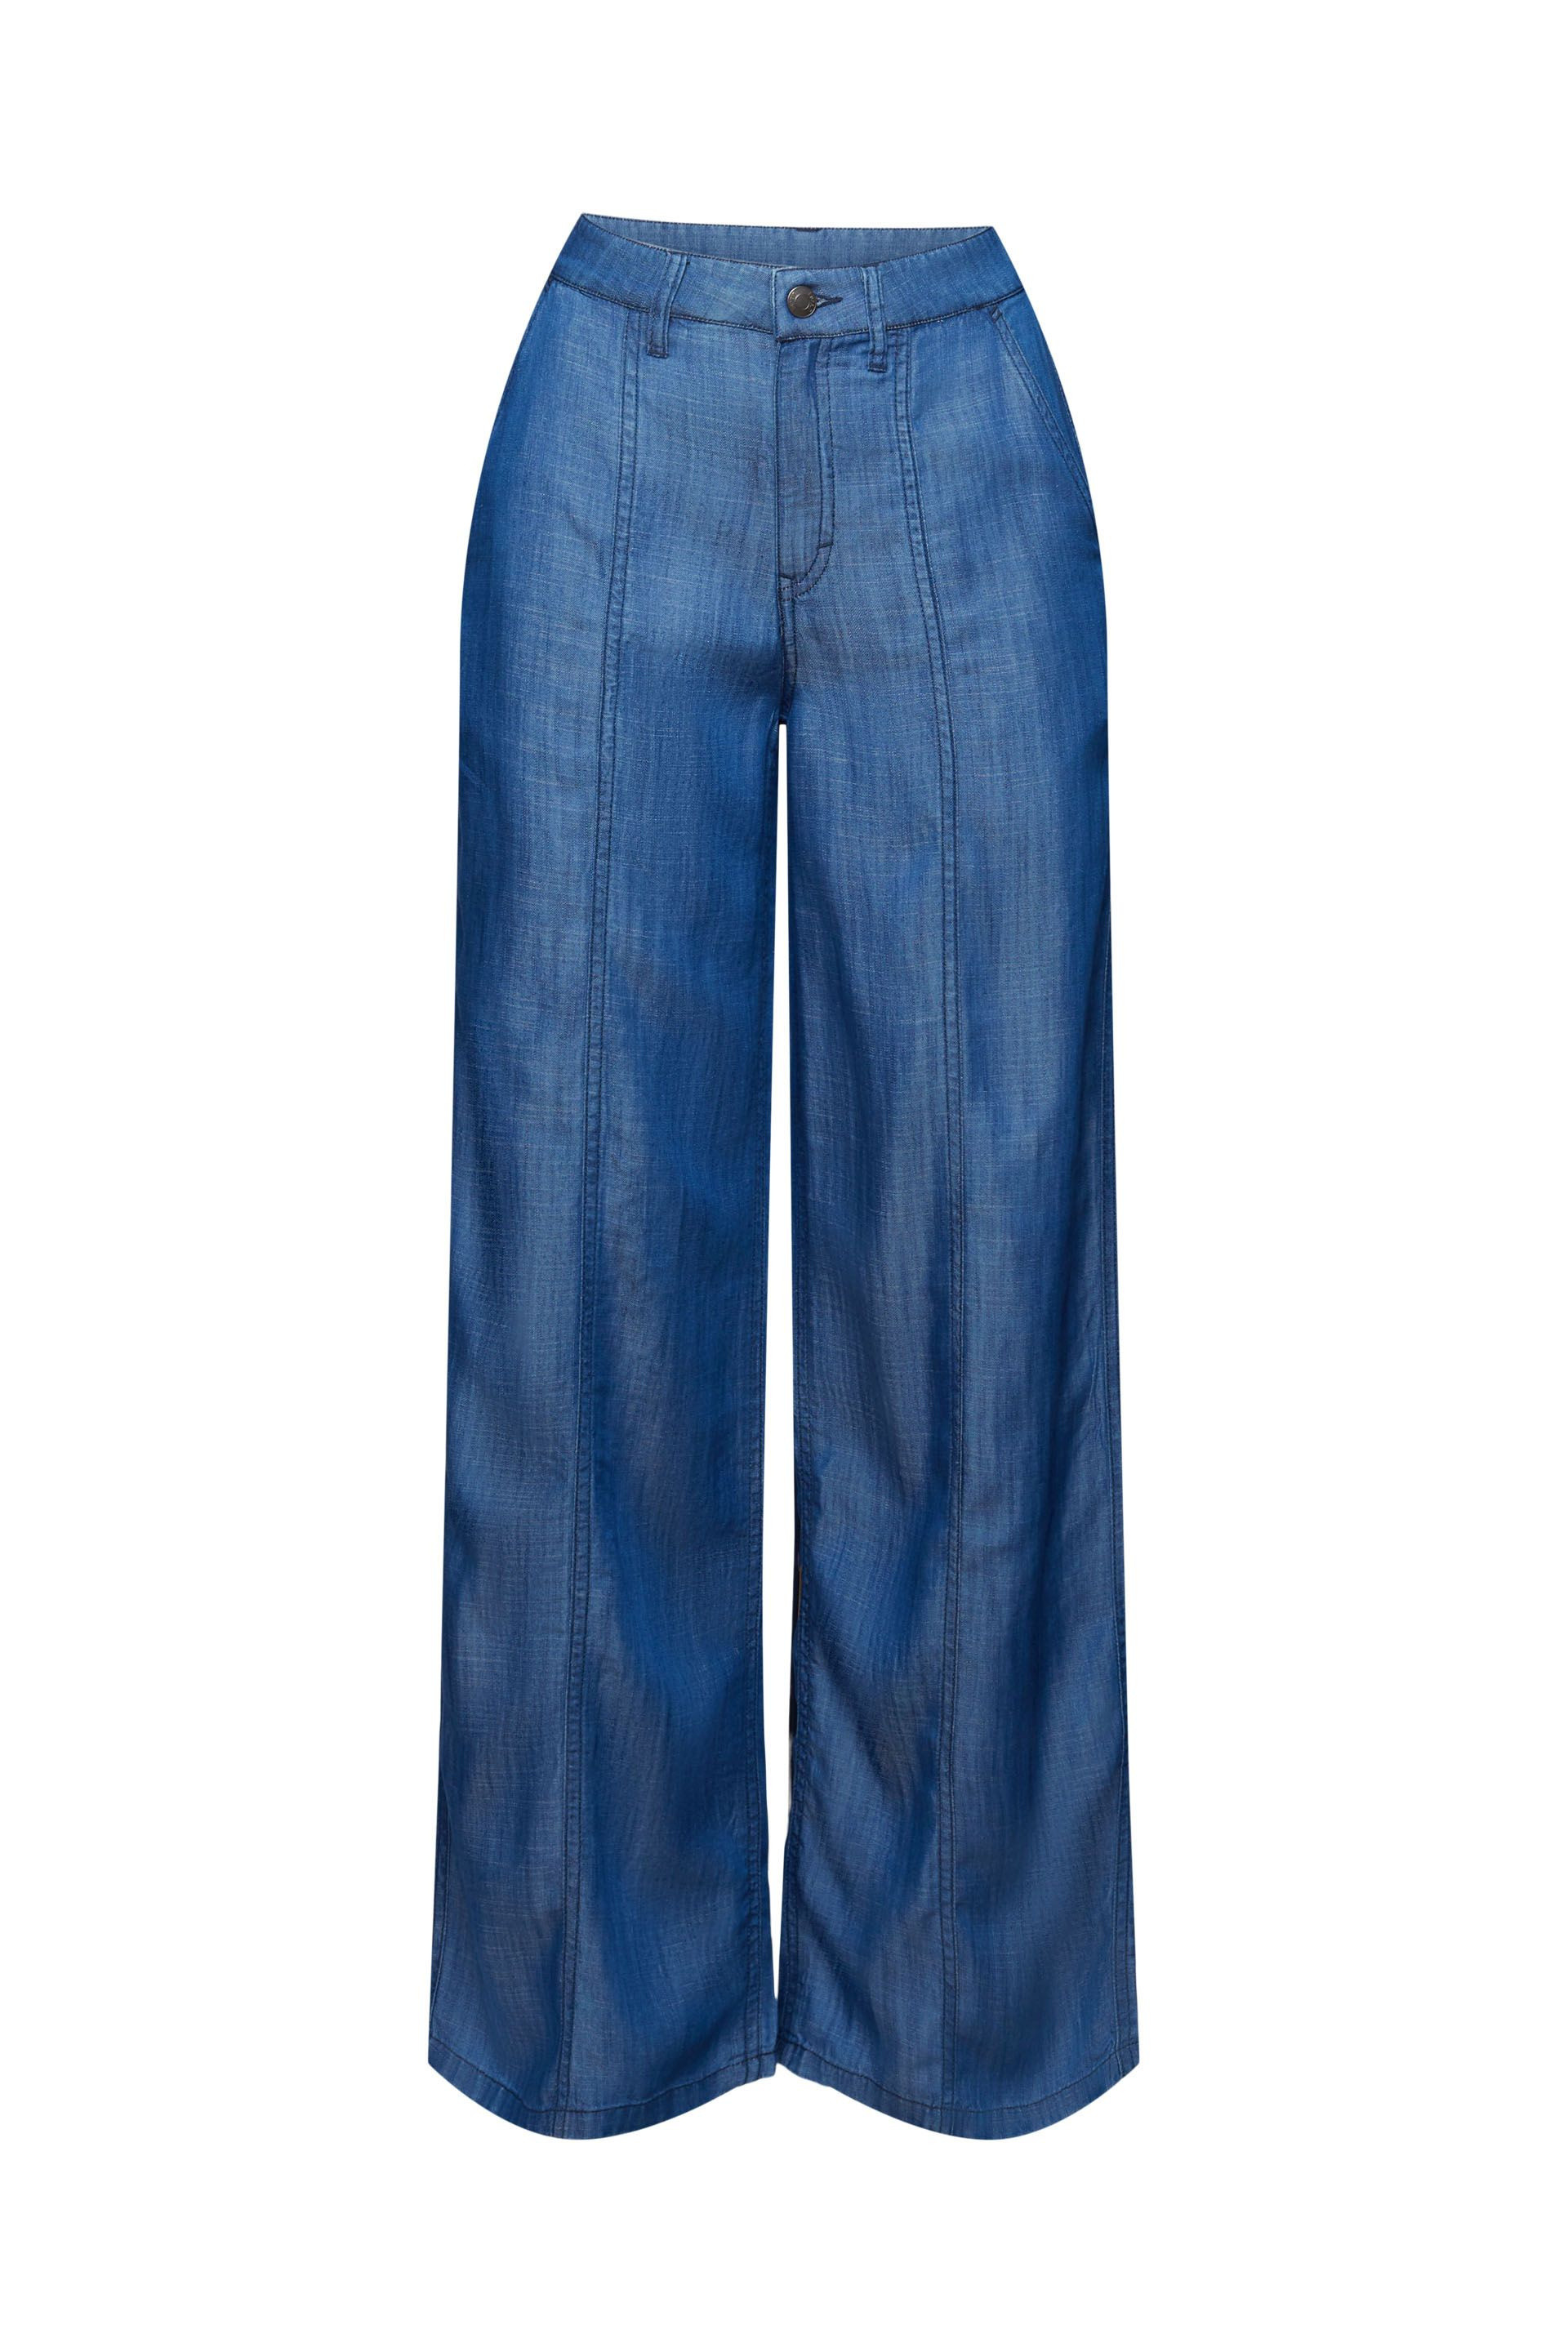 Esprit - Wide leg trousers and high waist, Denim, large image number 0